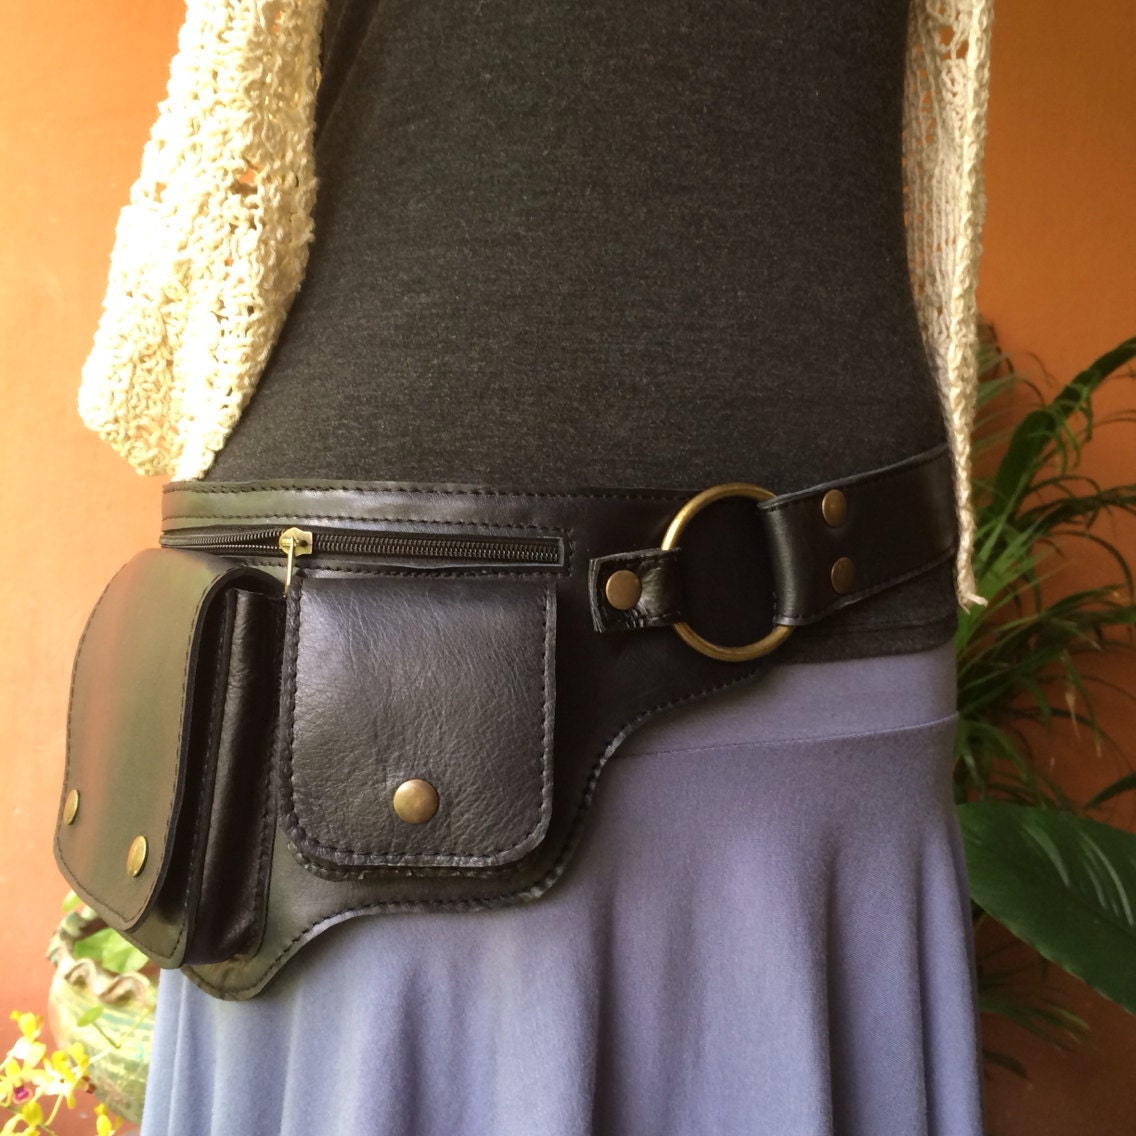 Leather Utility Belt Bag / Hip Bag / iphone 7 Pouch